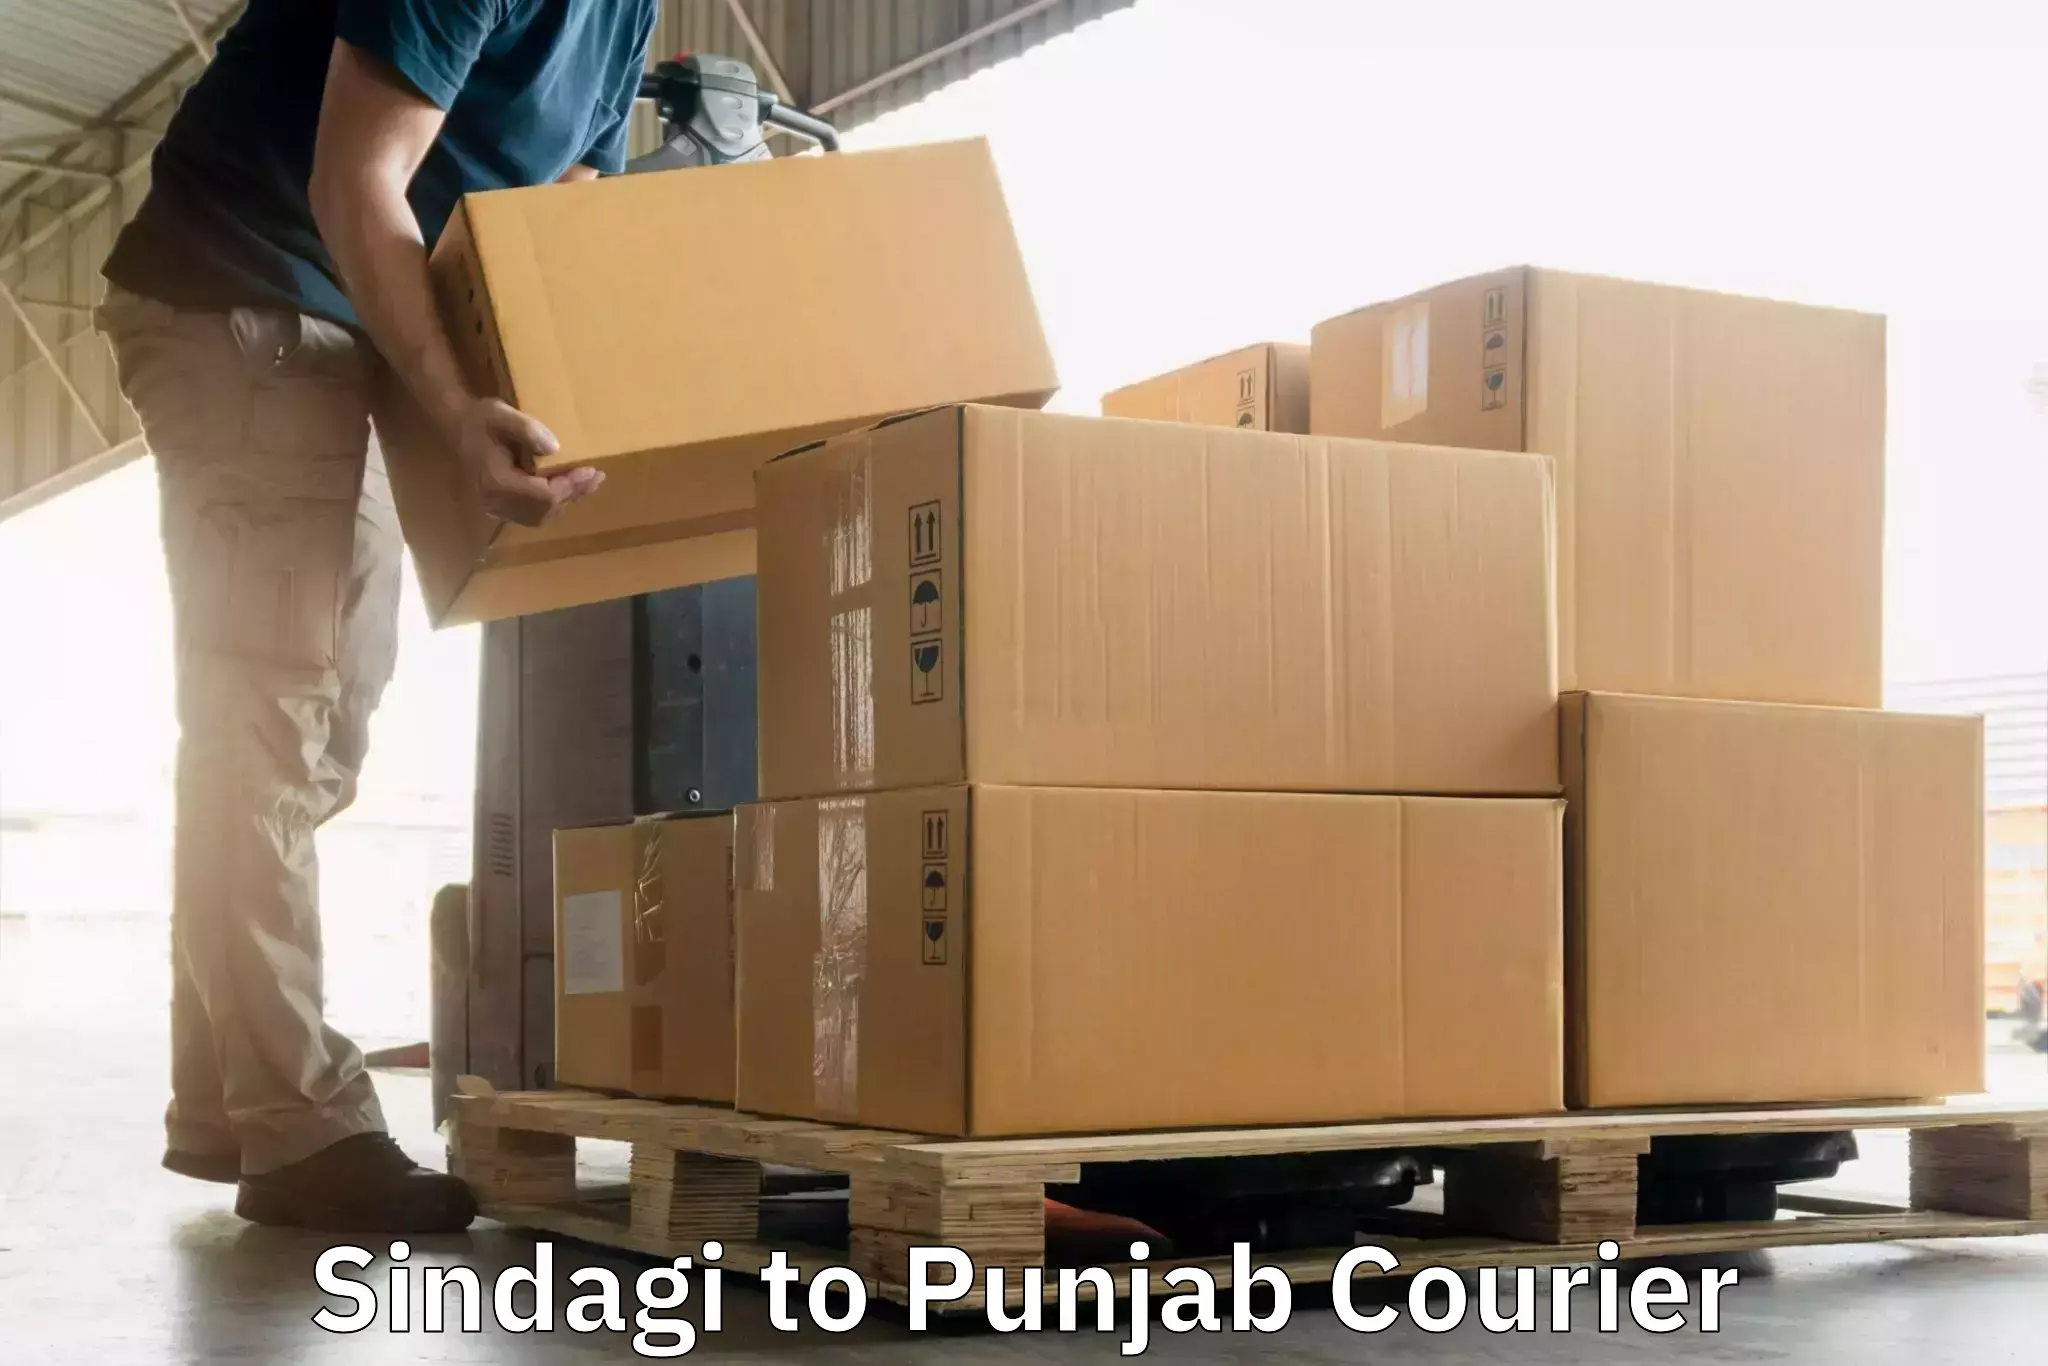 Quality courier services in Sindagi to Punjab